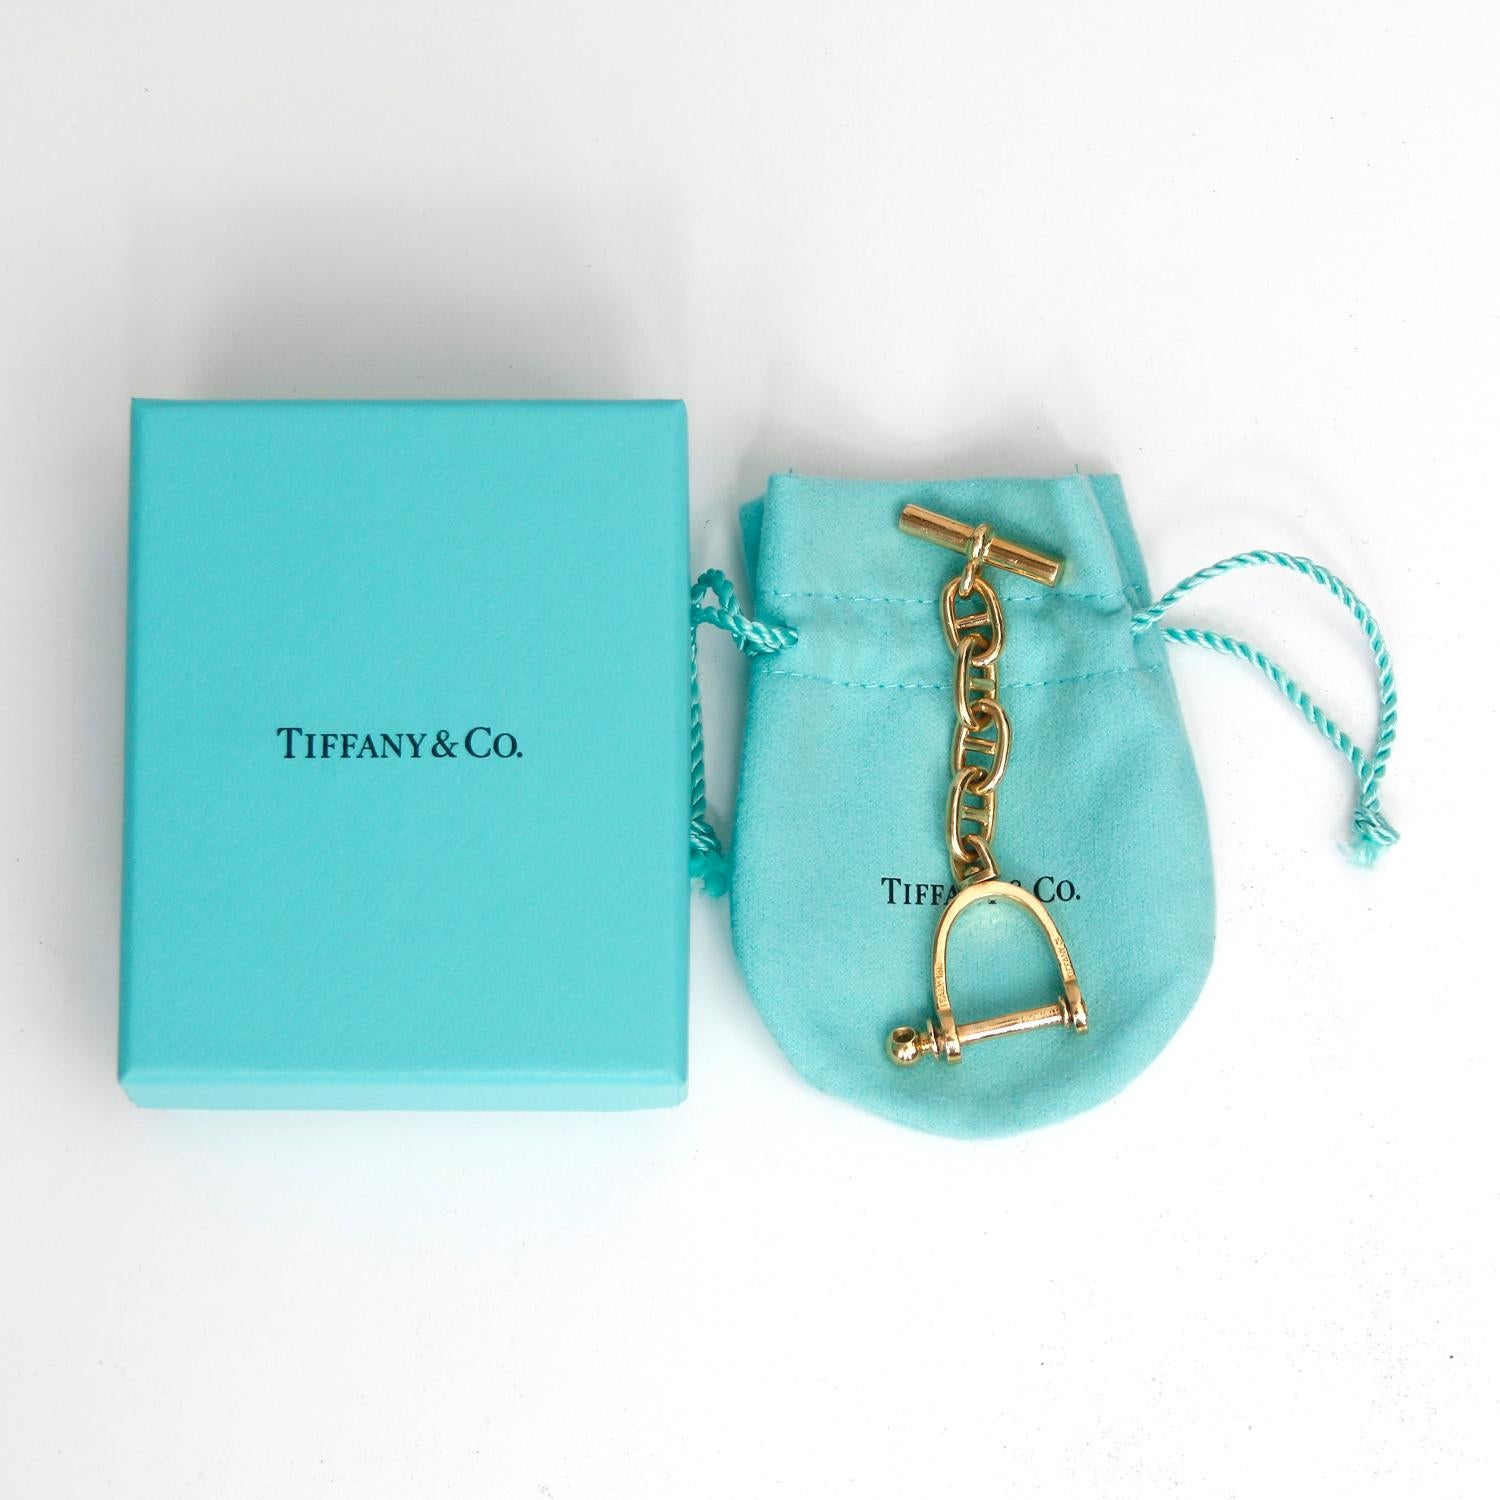 Tiffany & Co 18K Yellow Gold Key Chain  -  3 inches long, in fine condition and heavy weighing 22 grams. One will find the silver examples but this model is classic and unusual and not made by Tiffany today. Signed with the 18K gold mark.